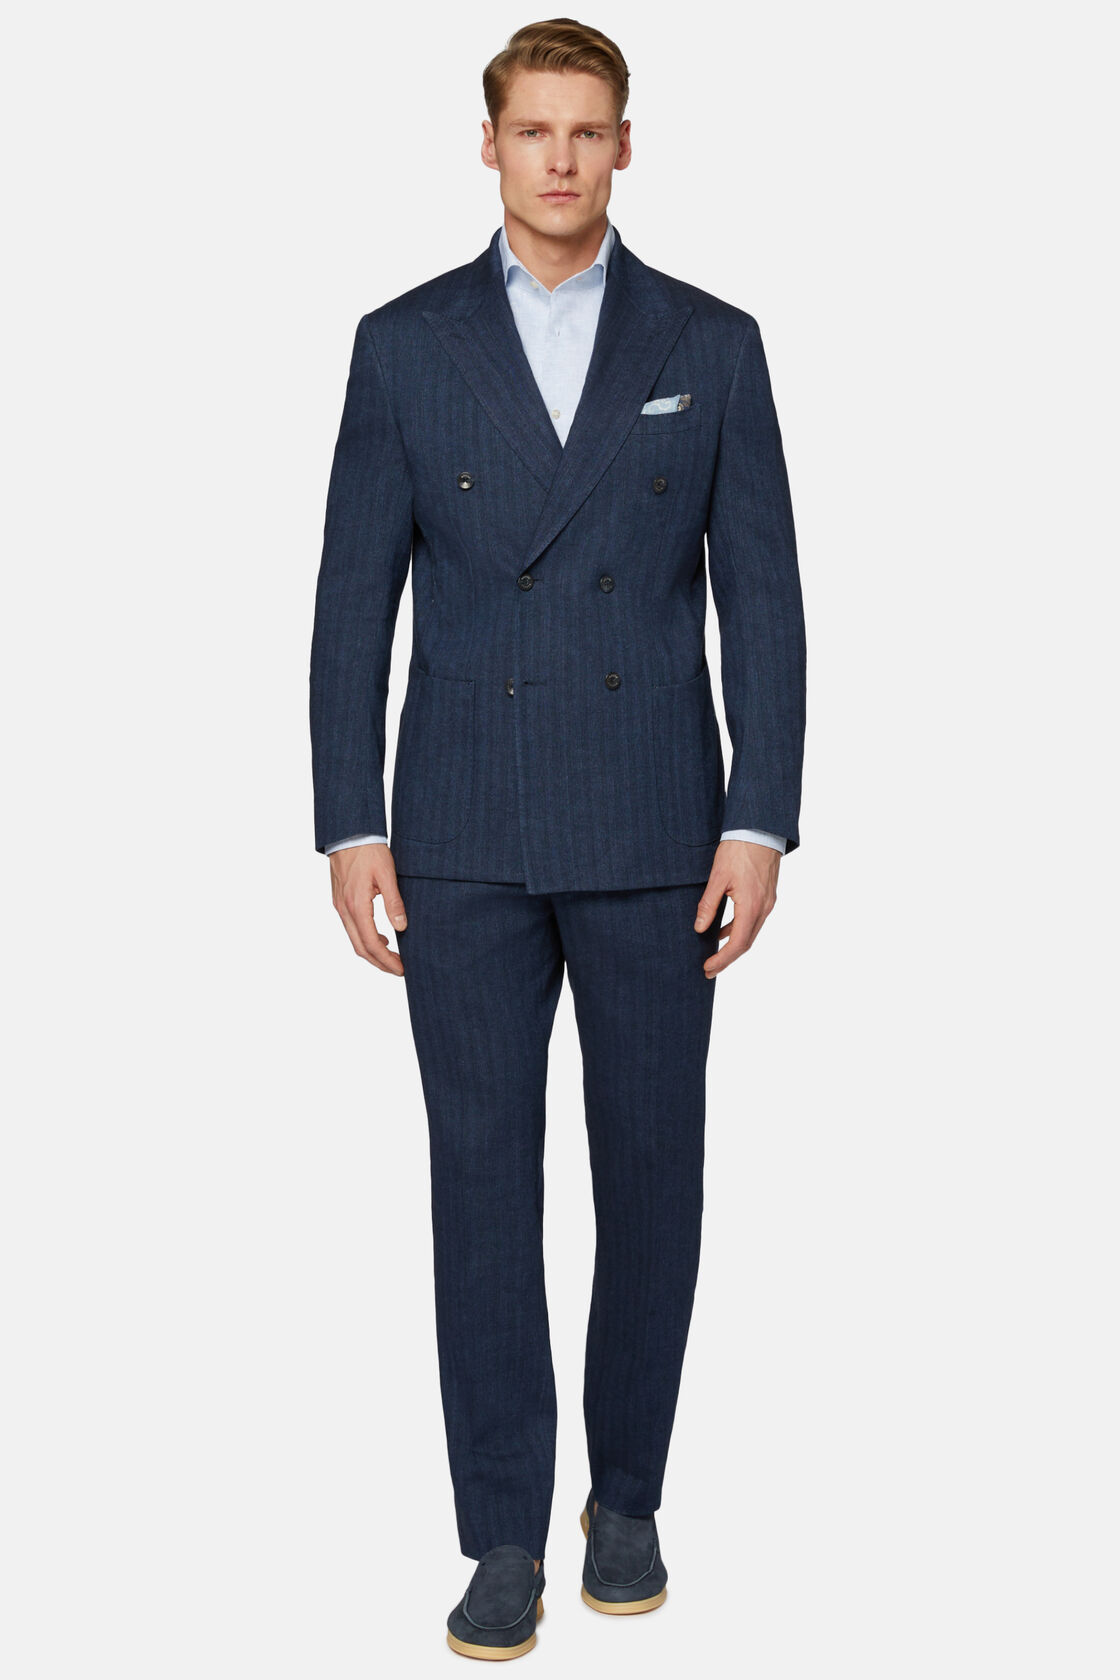 Navy Double-Breasted Suit In Cotton Linen, Navy blue, hi-res